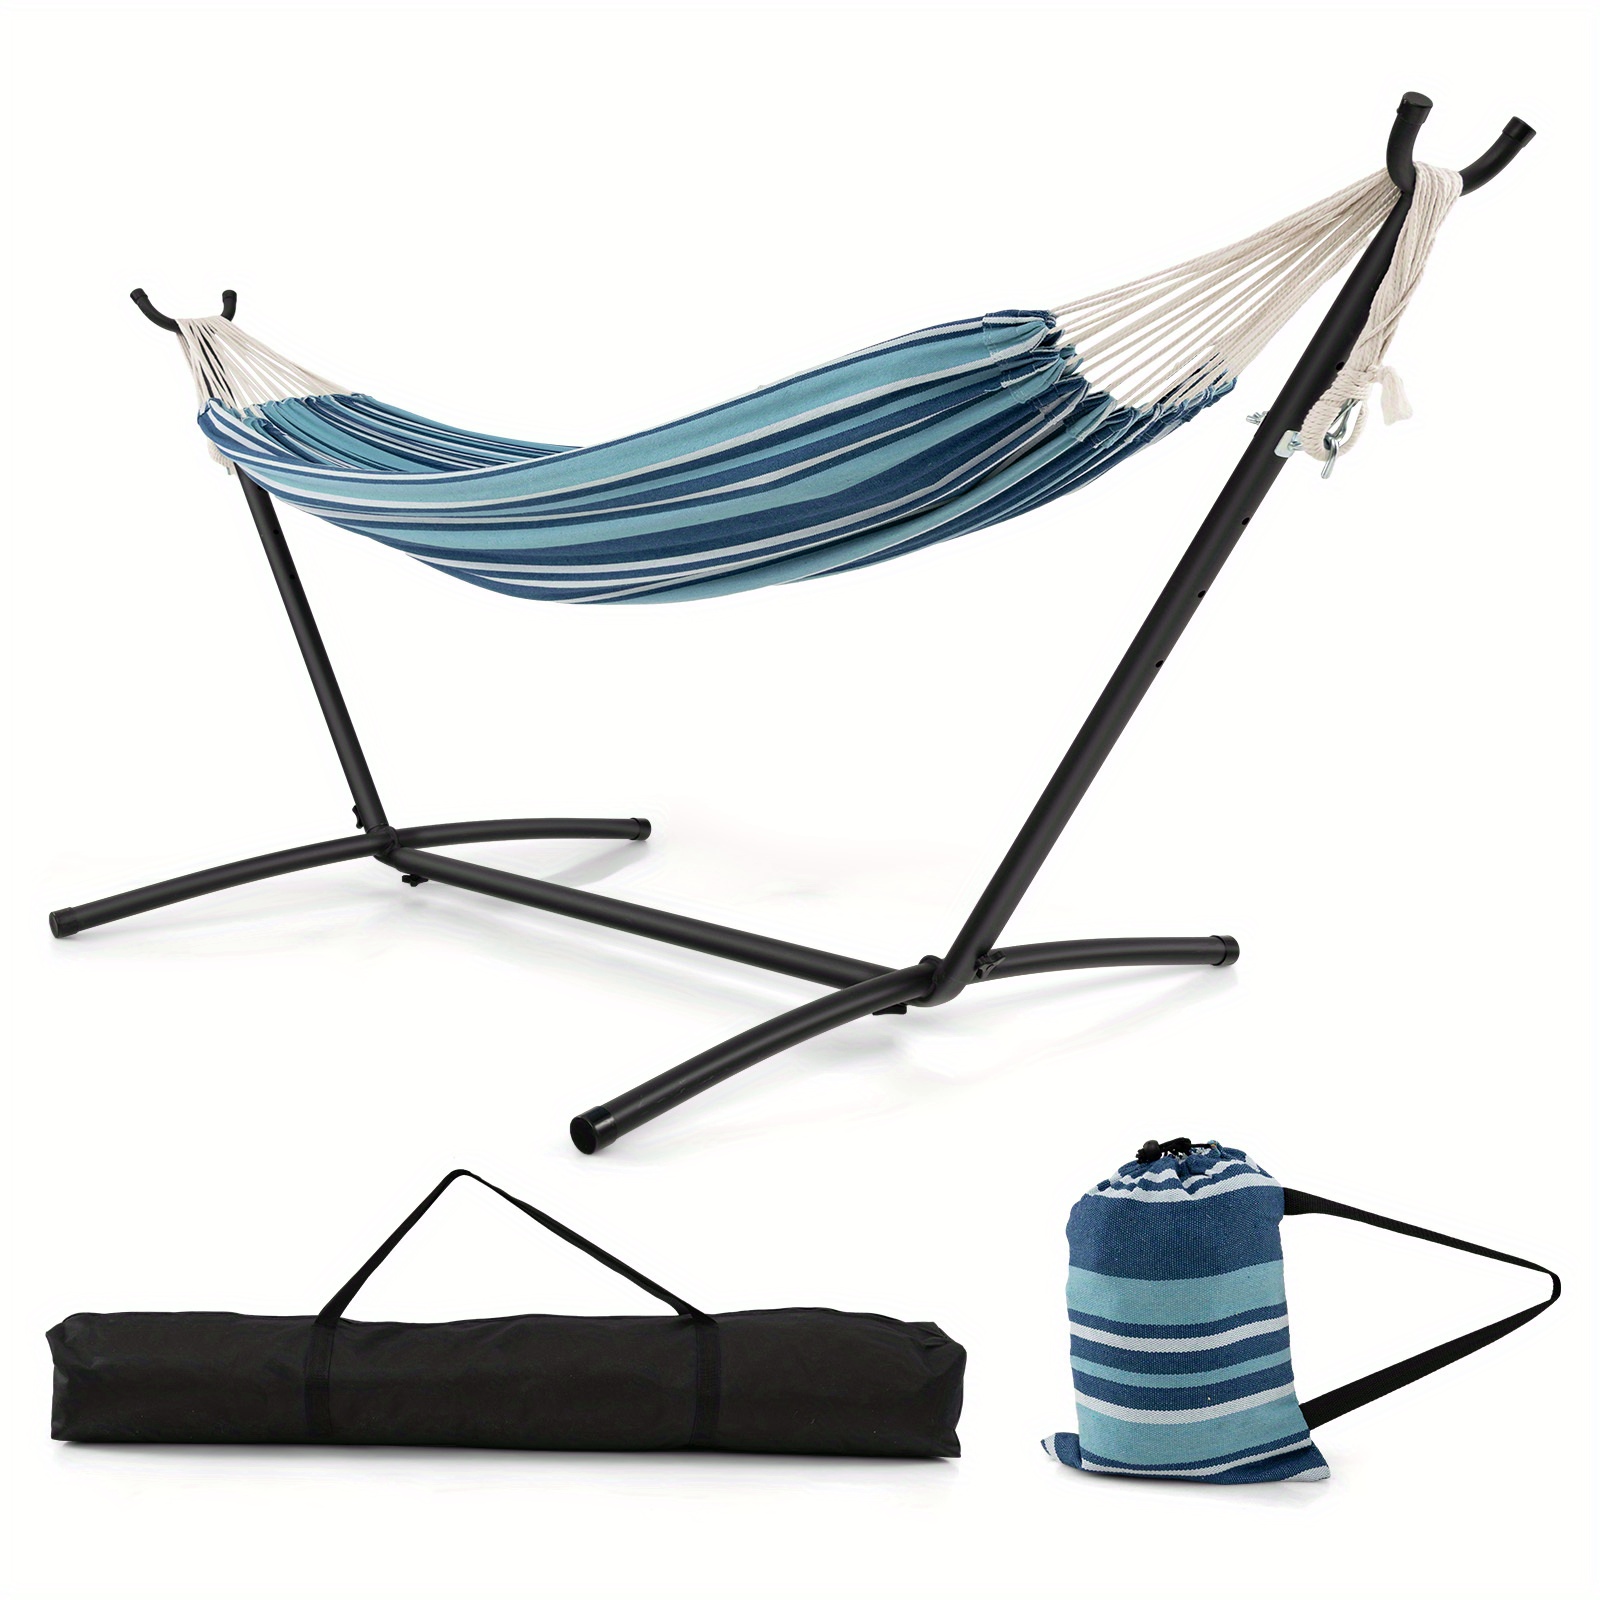 

Costway Portable Indoor Outdoor 2-person Double Hammock Set W/ Stand And Carrying Cases